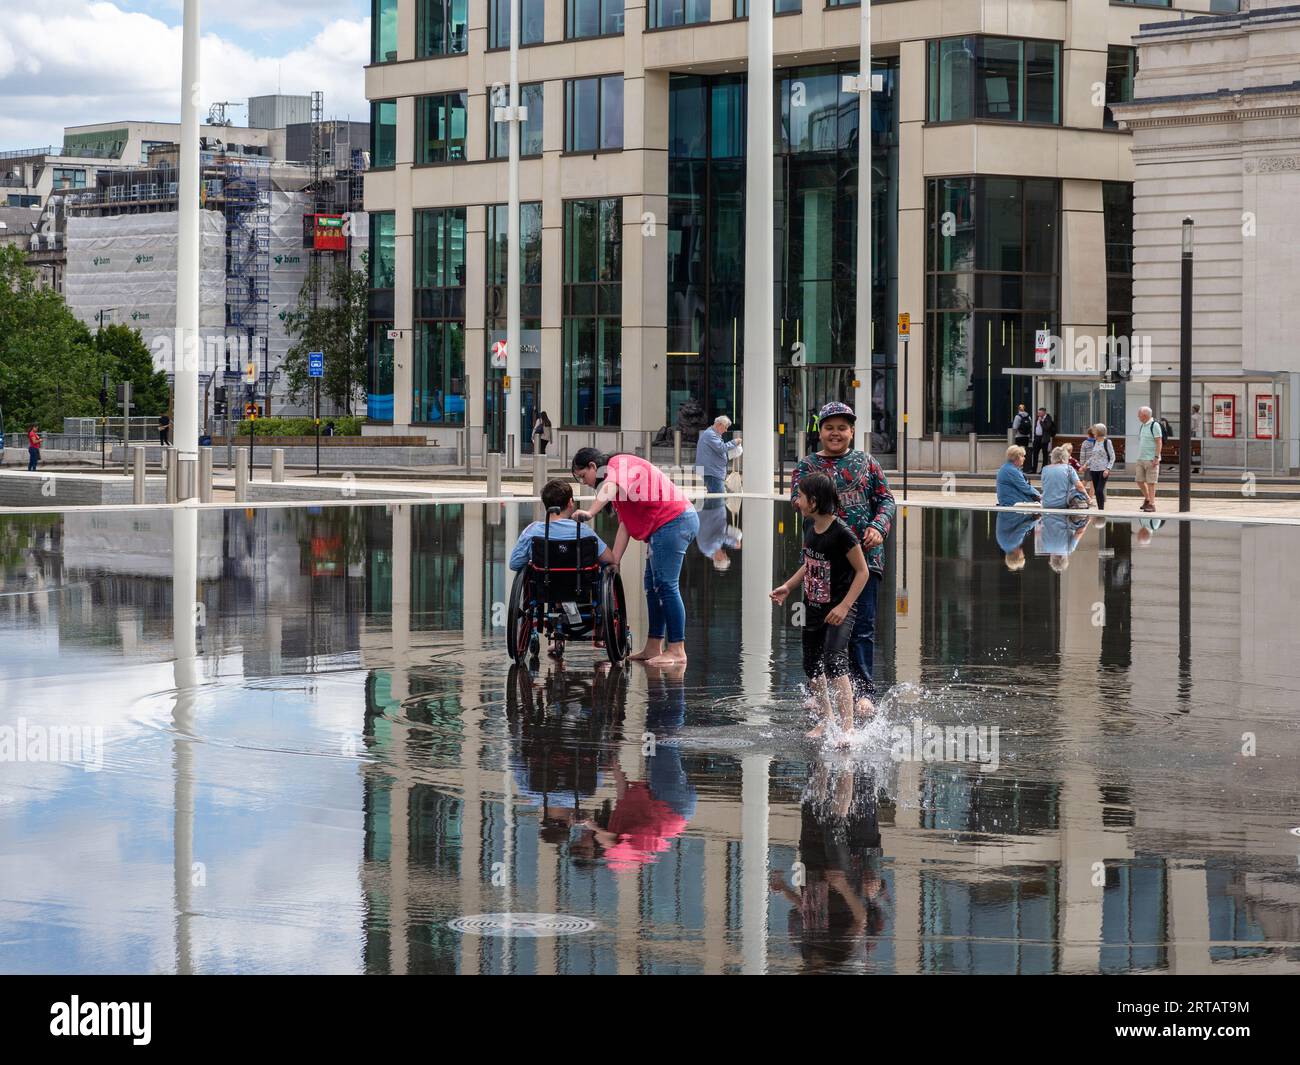 Visitors to Birmingham UK cool down in a shallow pool in Centenary Square, on a warm summer day; England, UK Stock Photo